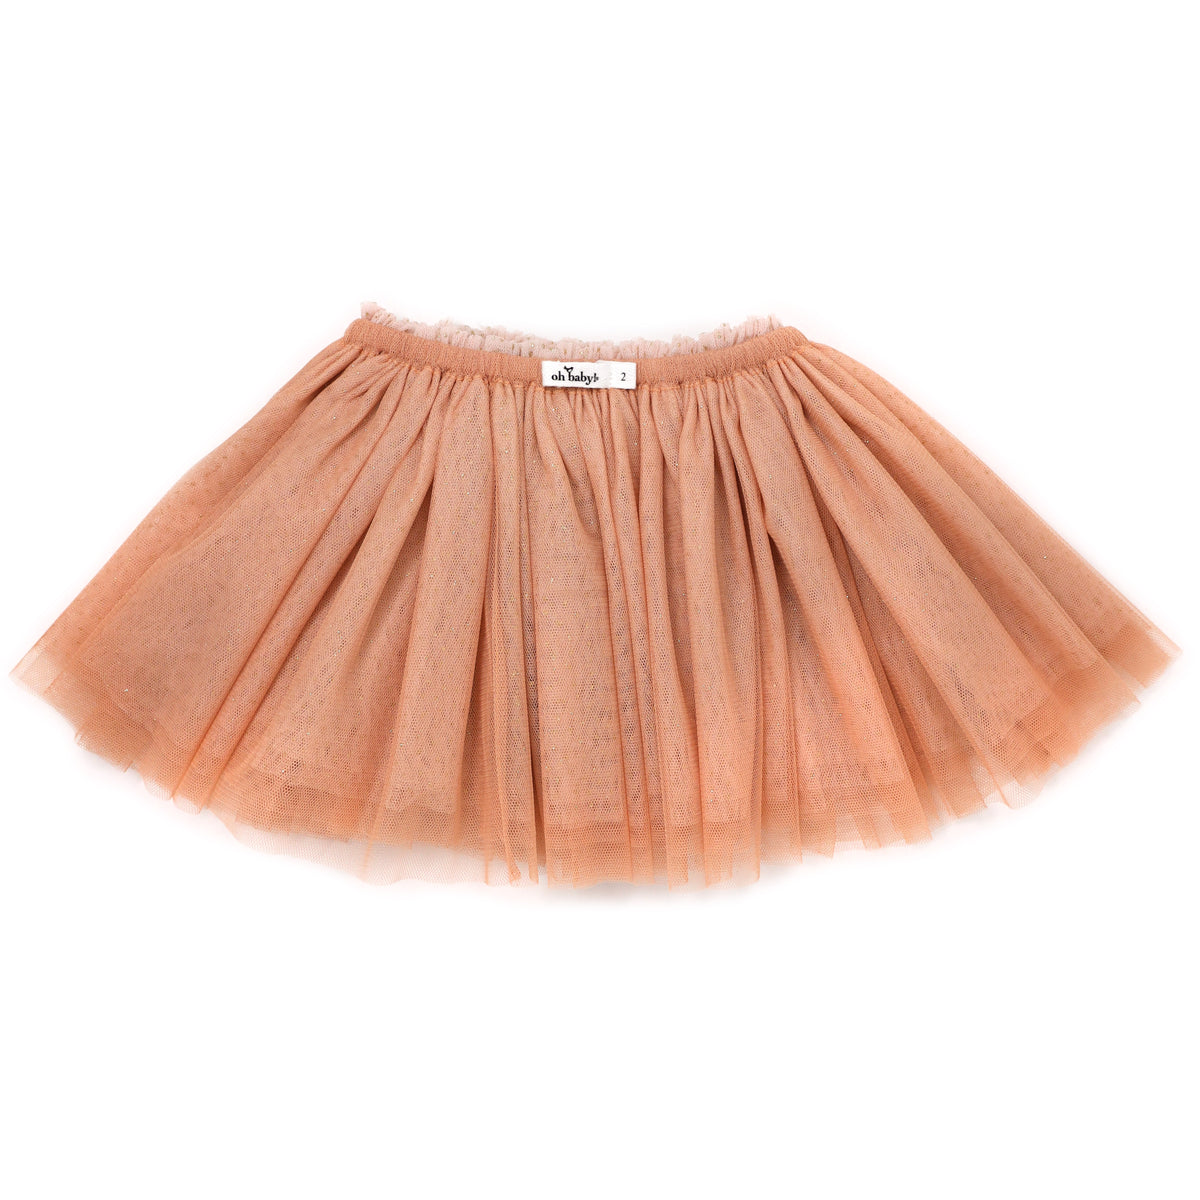 oh baby! Frill Tutu Vintage Pink/Gold over Pale Pink